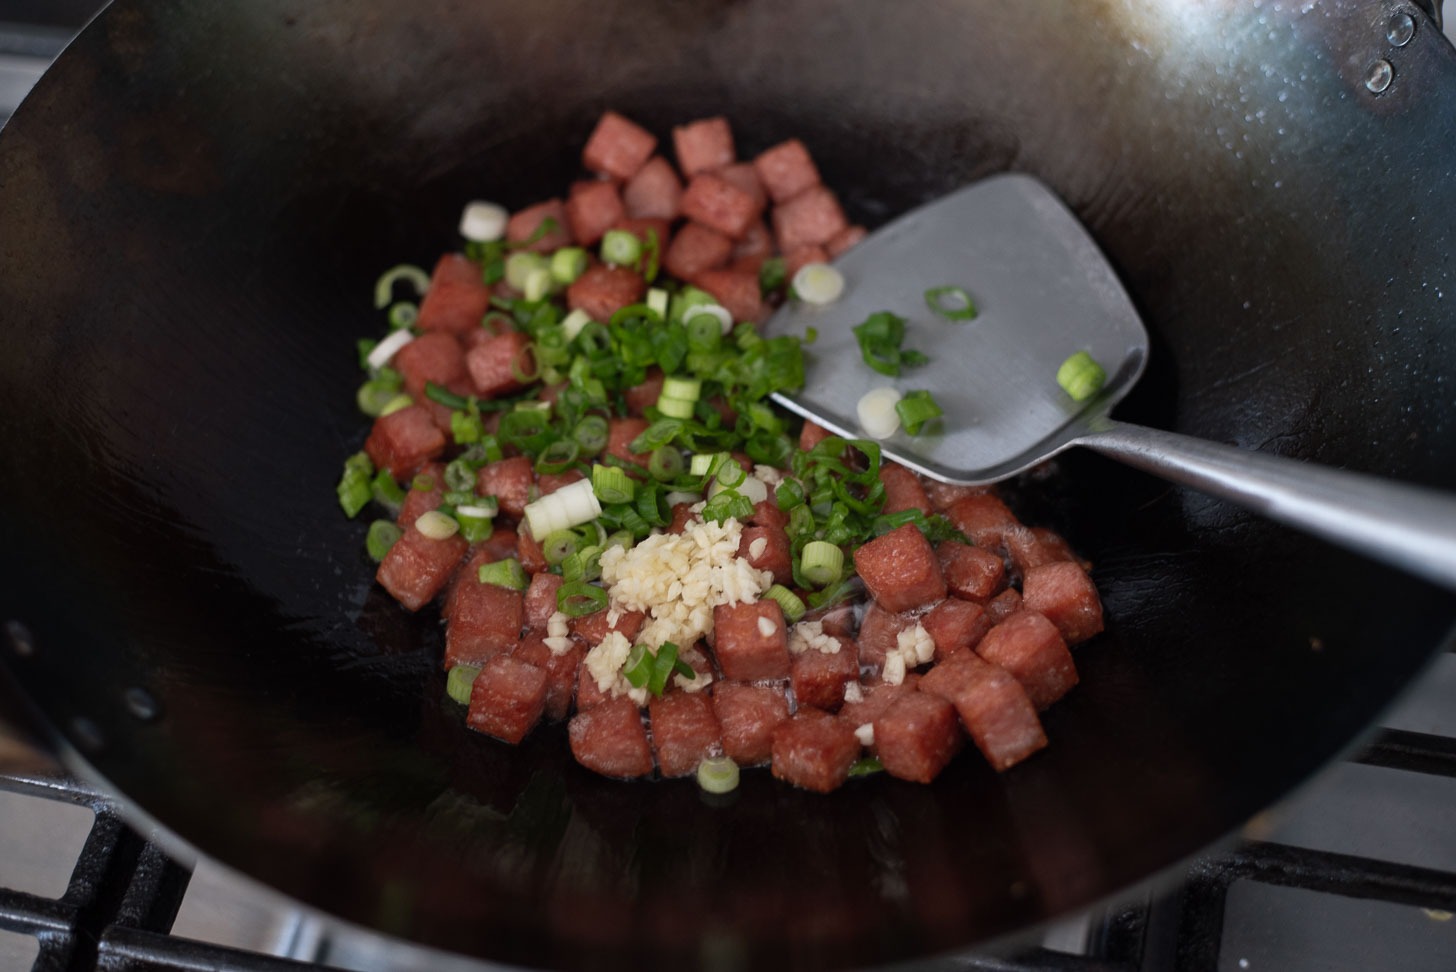 Green onion and garlic is added to fried Spam pieces.